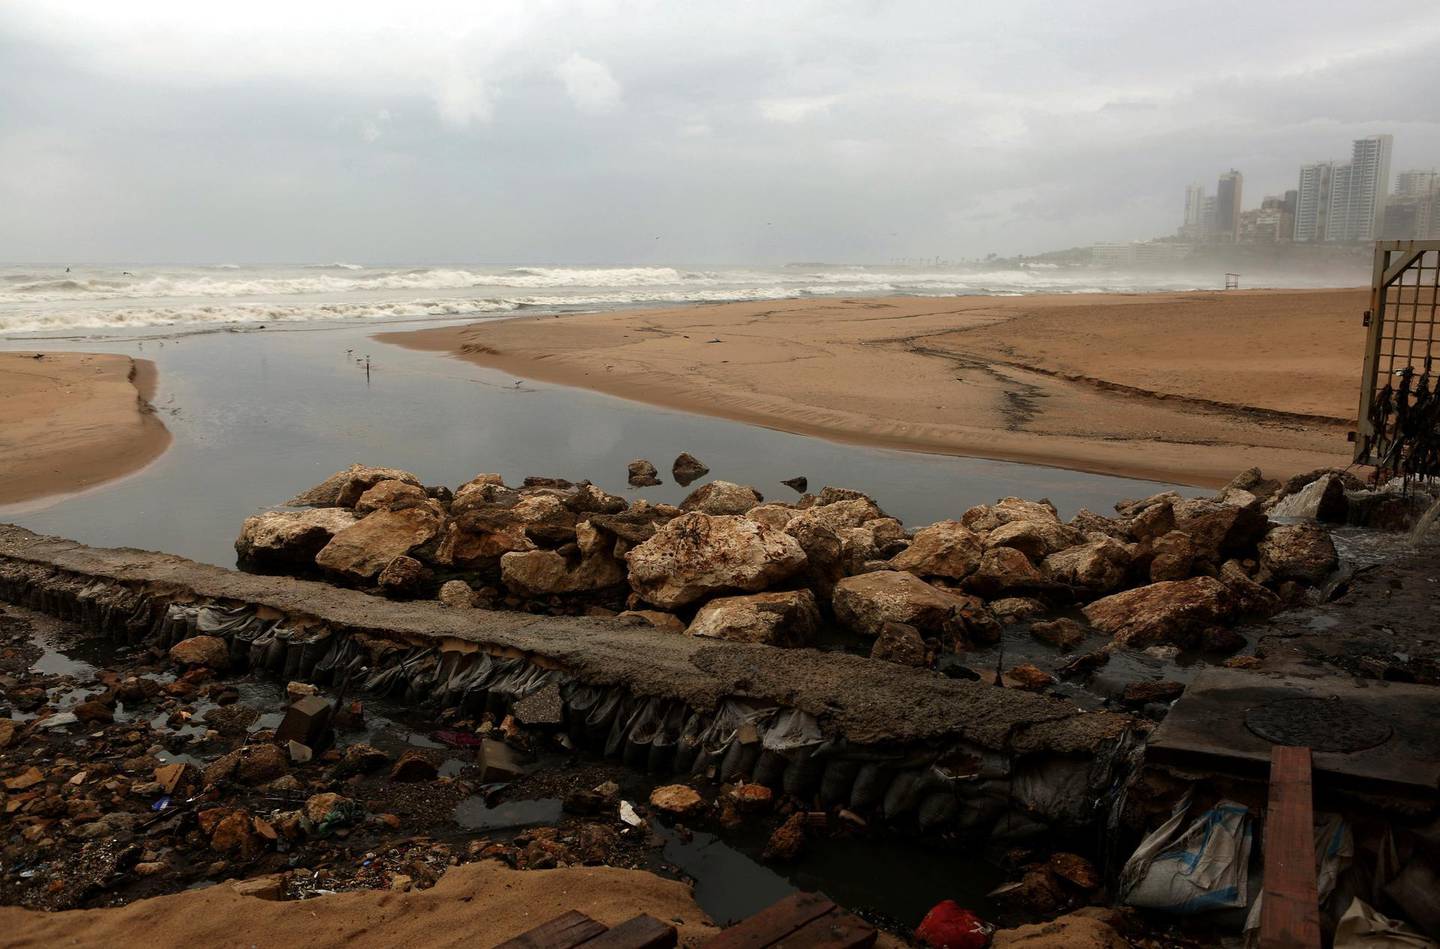 Sewage water pours into the sea at Beirut's public beach, Ramlet al-Baida, on January 5, 2016. AFP PHOTO / PATRICK BAZ / AFP PHOTO / PATRICK BAZ